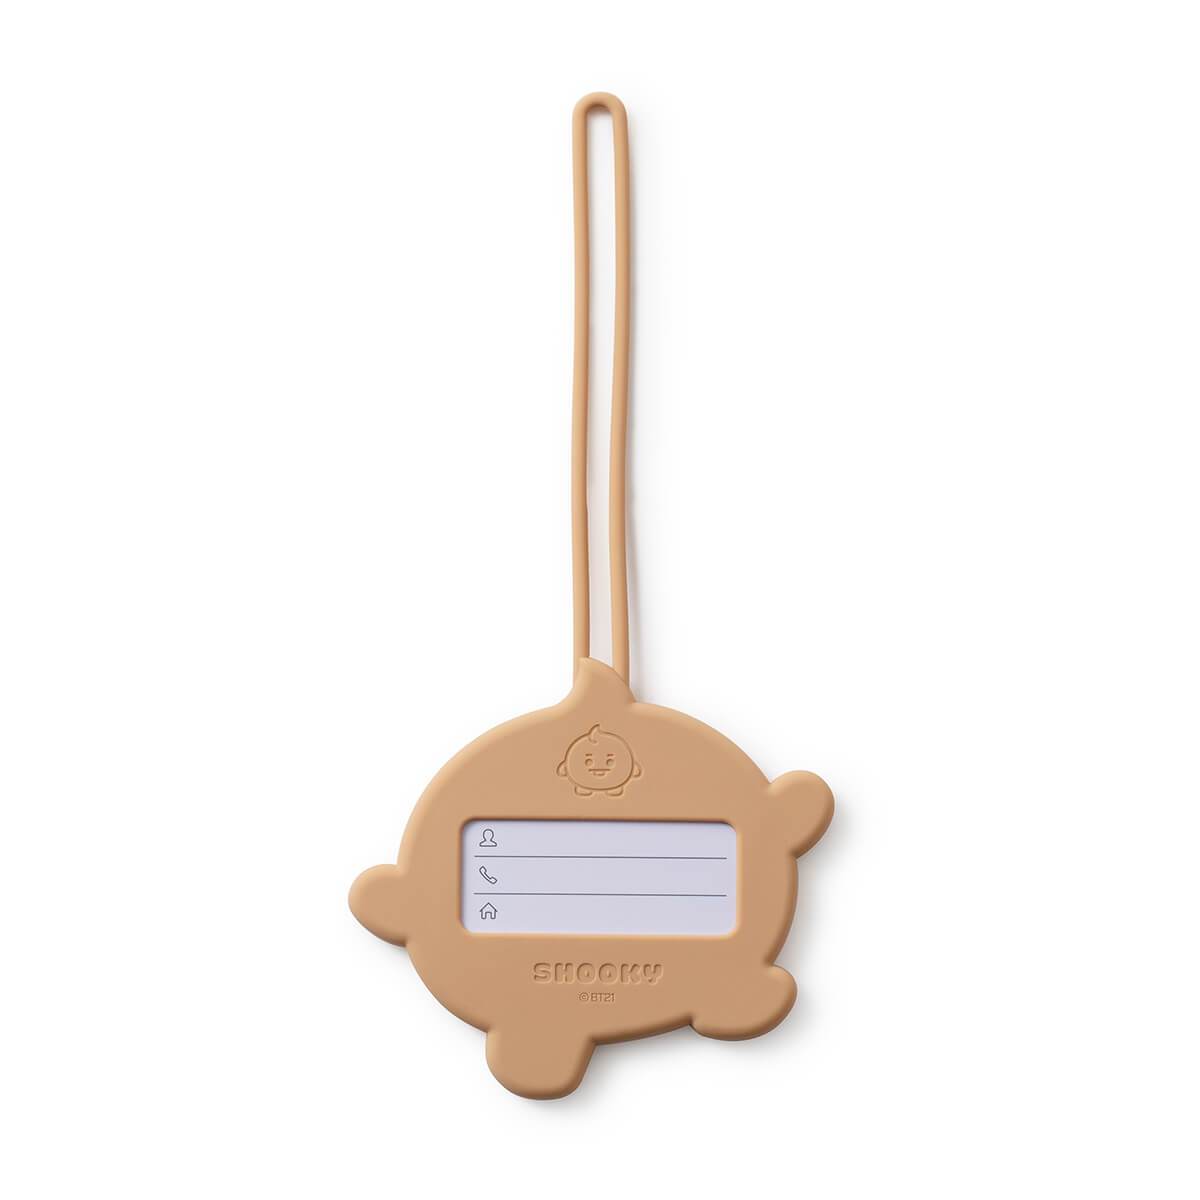 BT21 SHOOKY Baby Silicone Name Tag